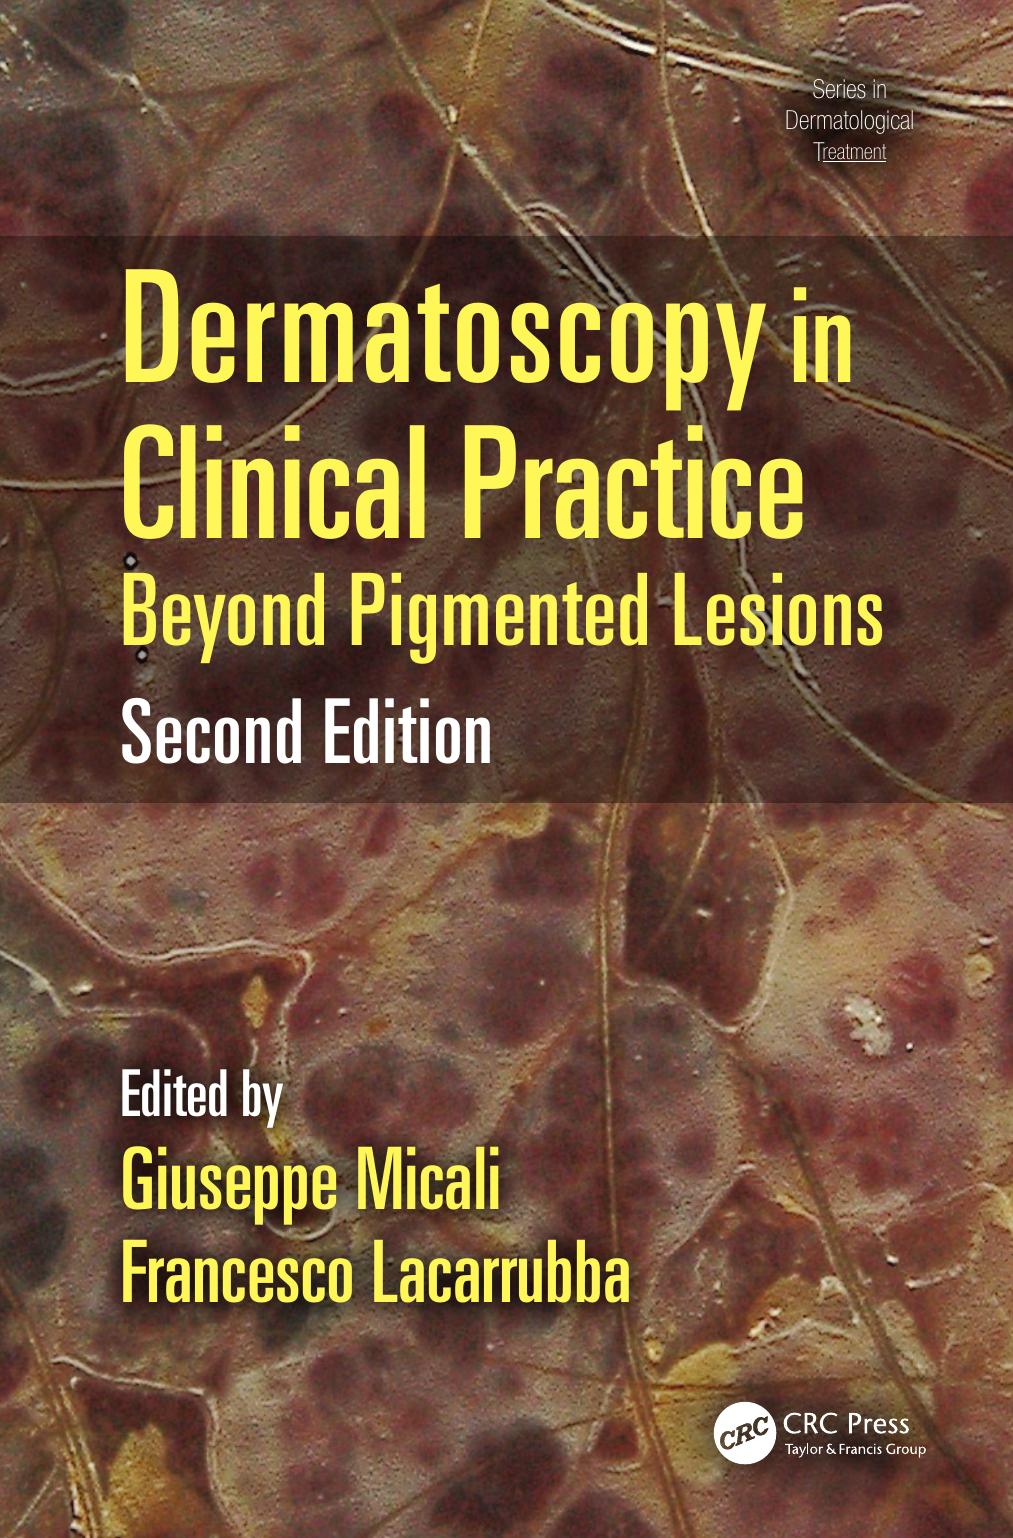 Dermatoscopy in Clinical Practice: Beyond Pigmented Lesions